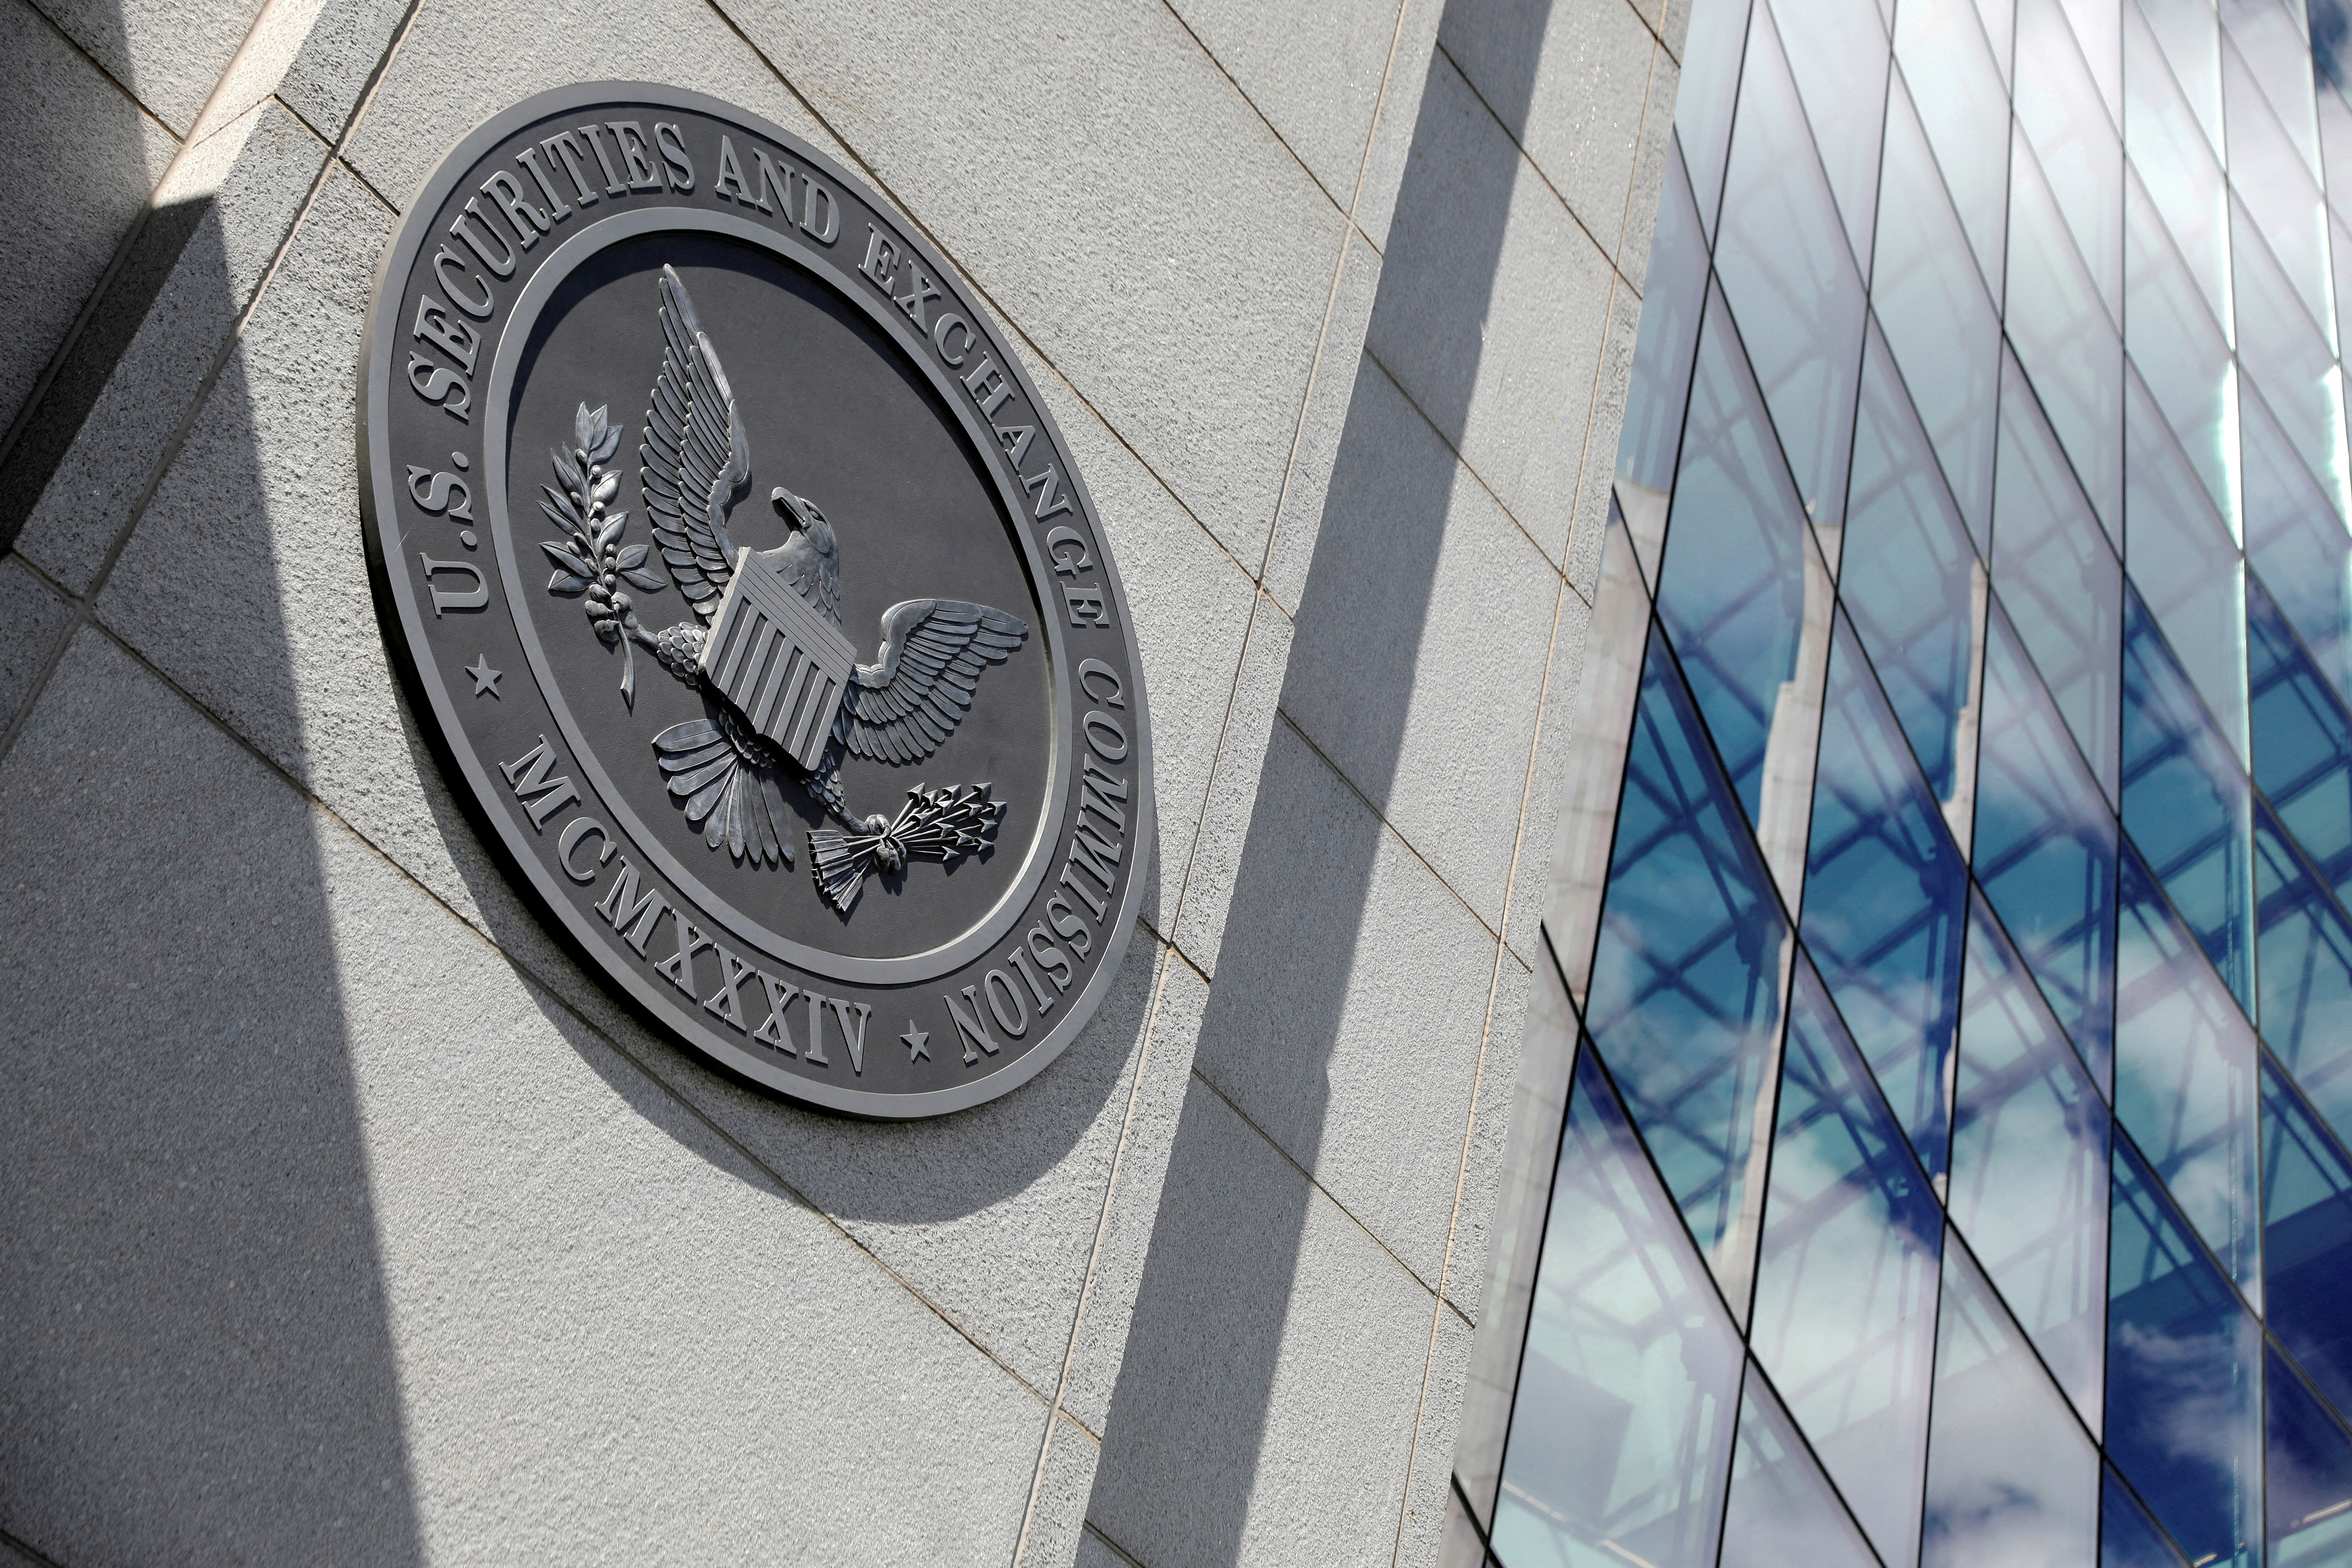 The seal of the U.S. Securities and Exchange Commission (SEC) is seen at their  headquarters in Washington, D.C.